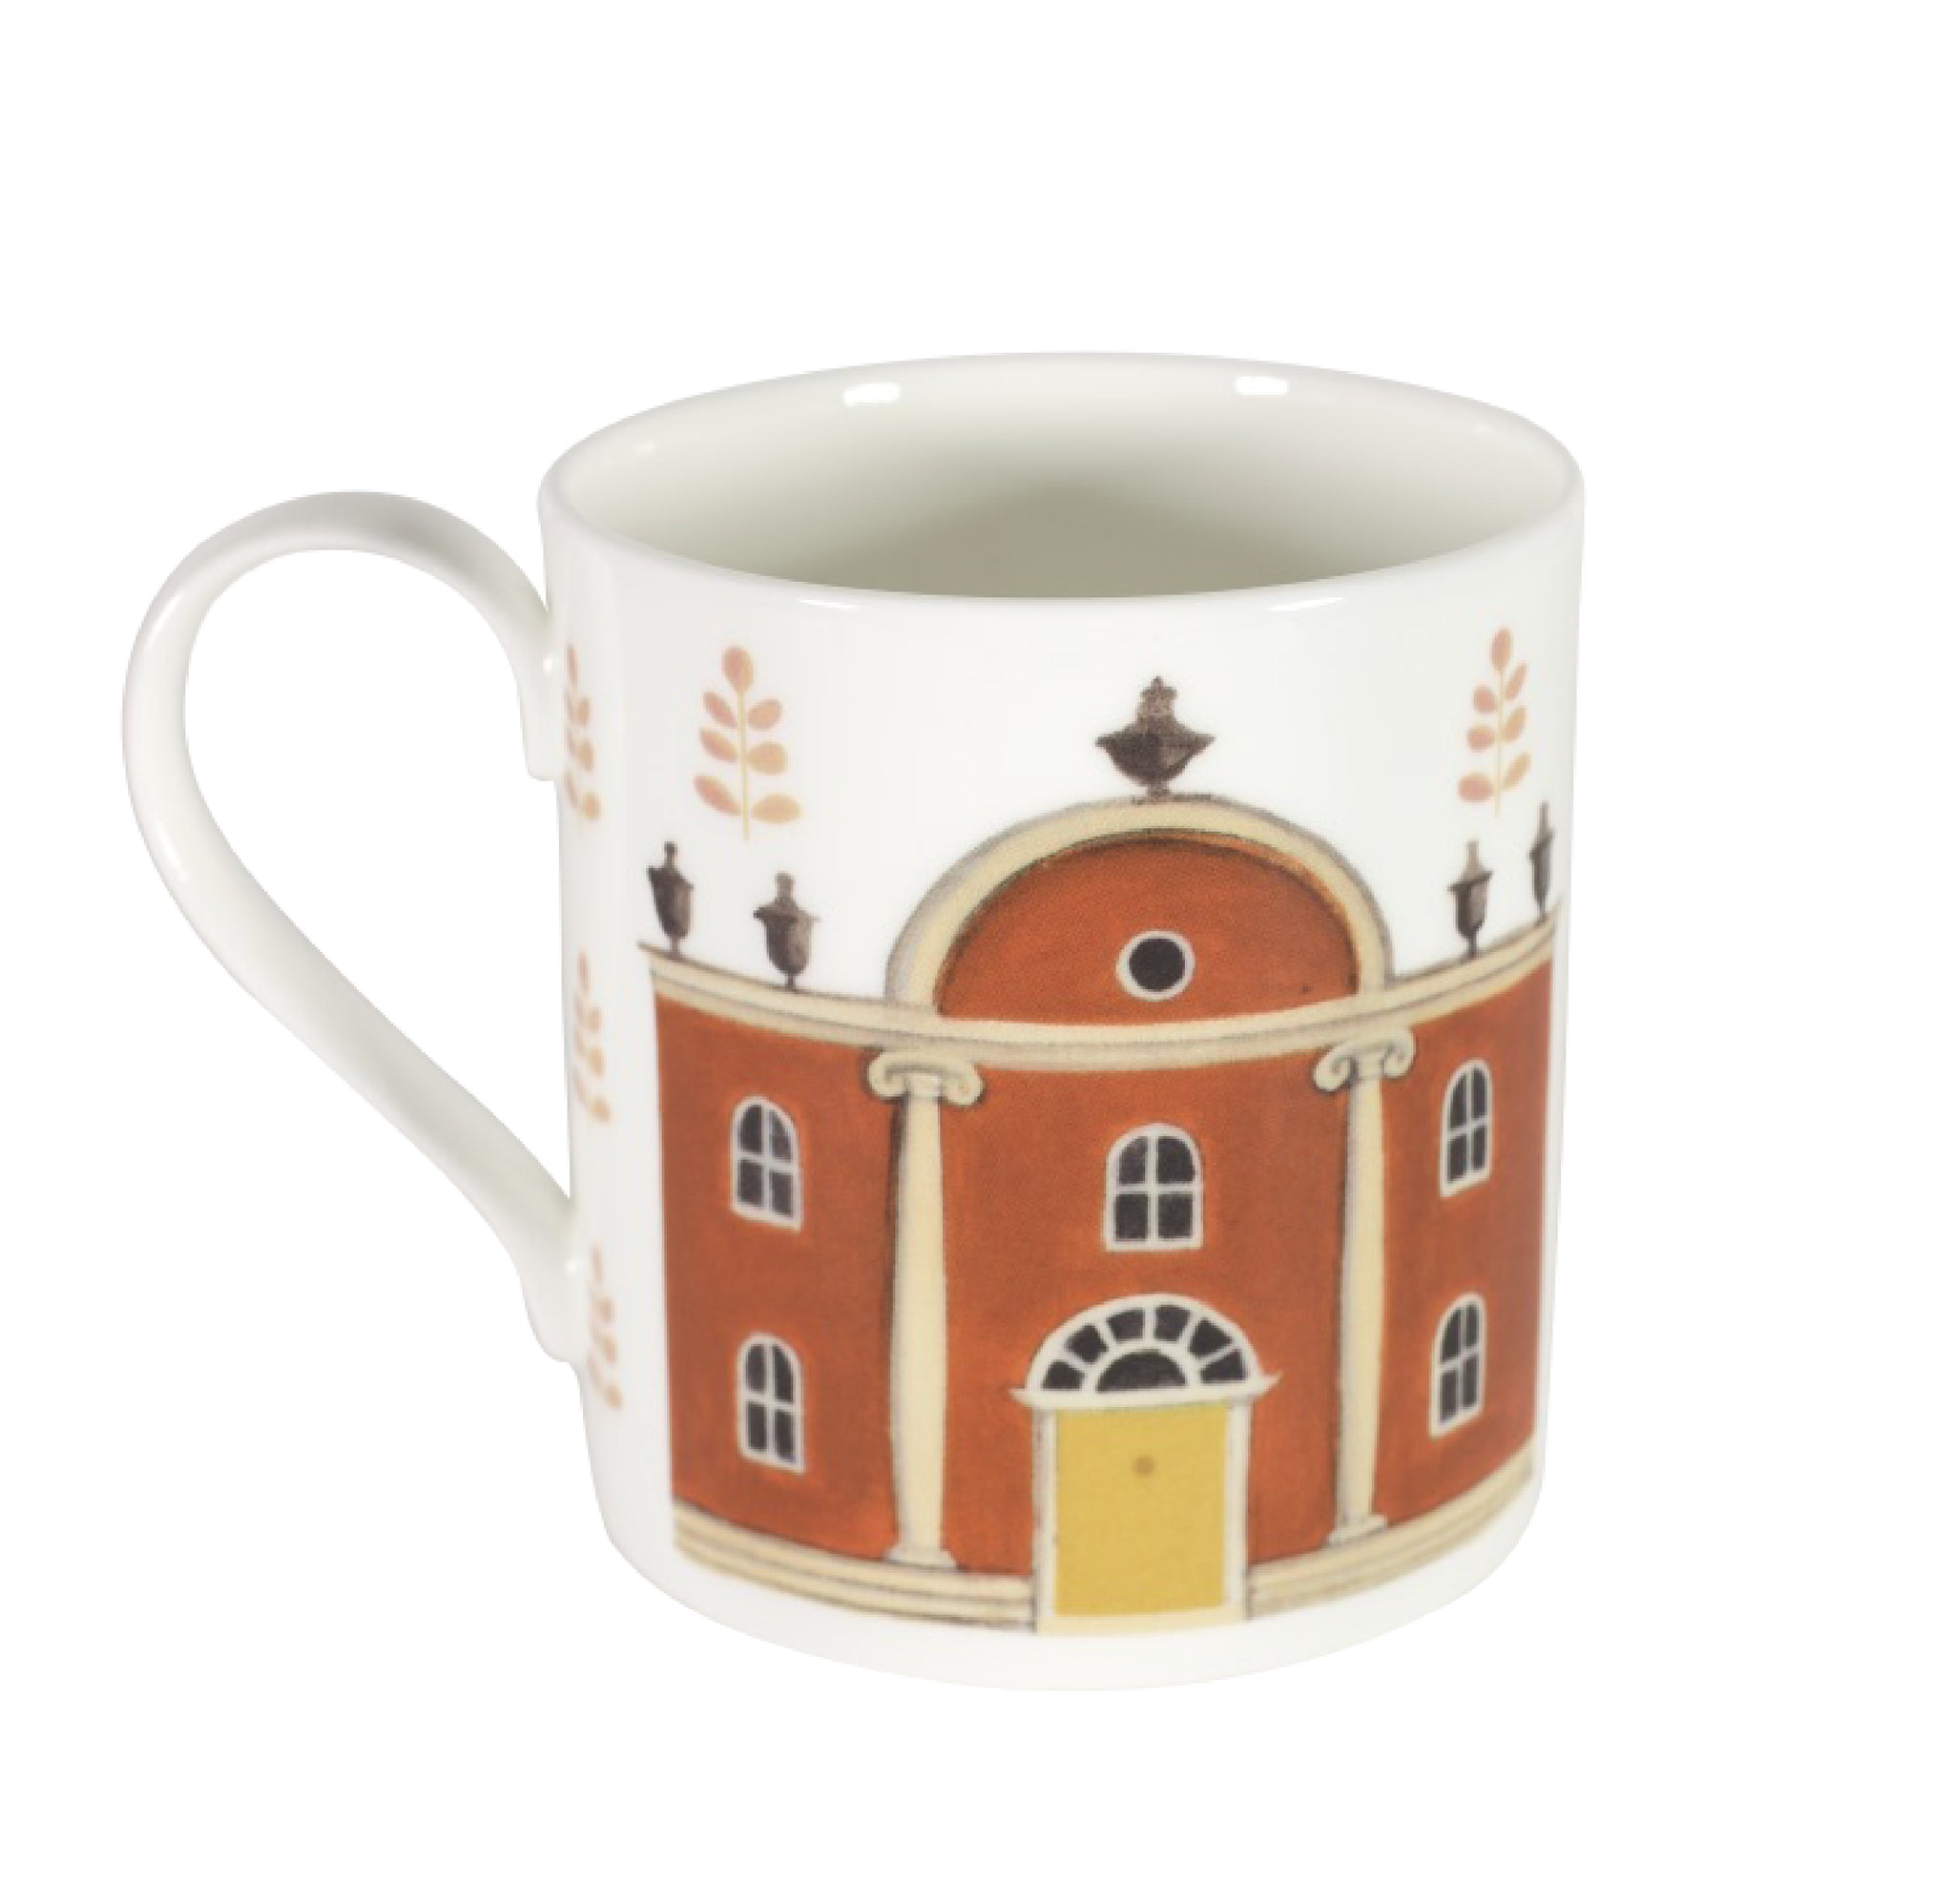 Two-sided fine bone china mug depicting a house on one side and hound on the other side